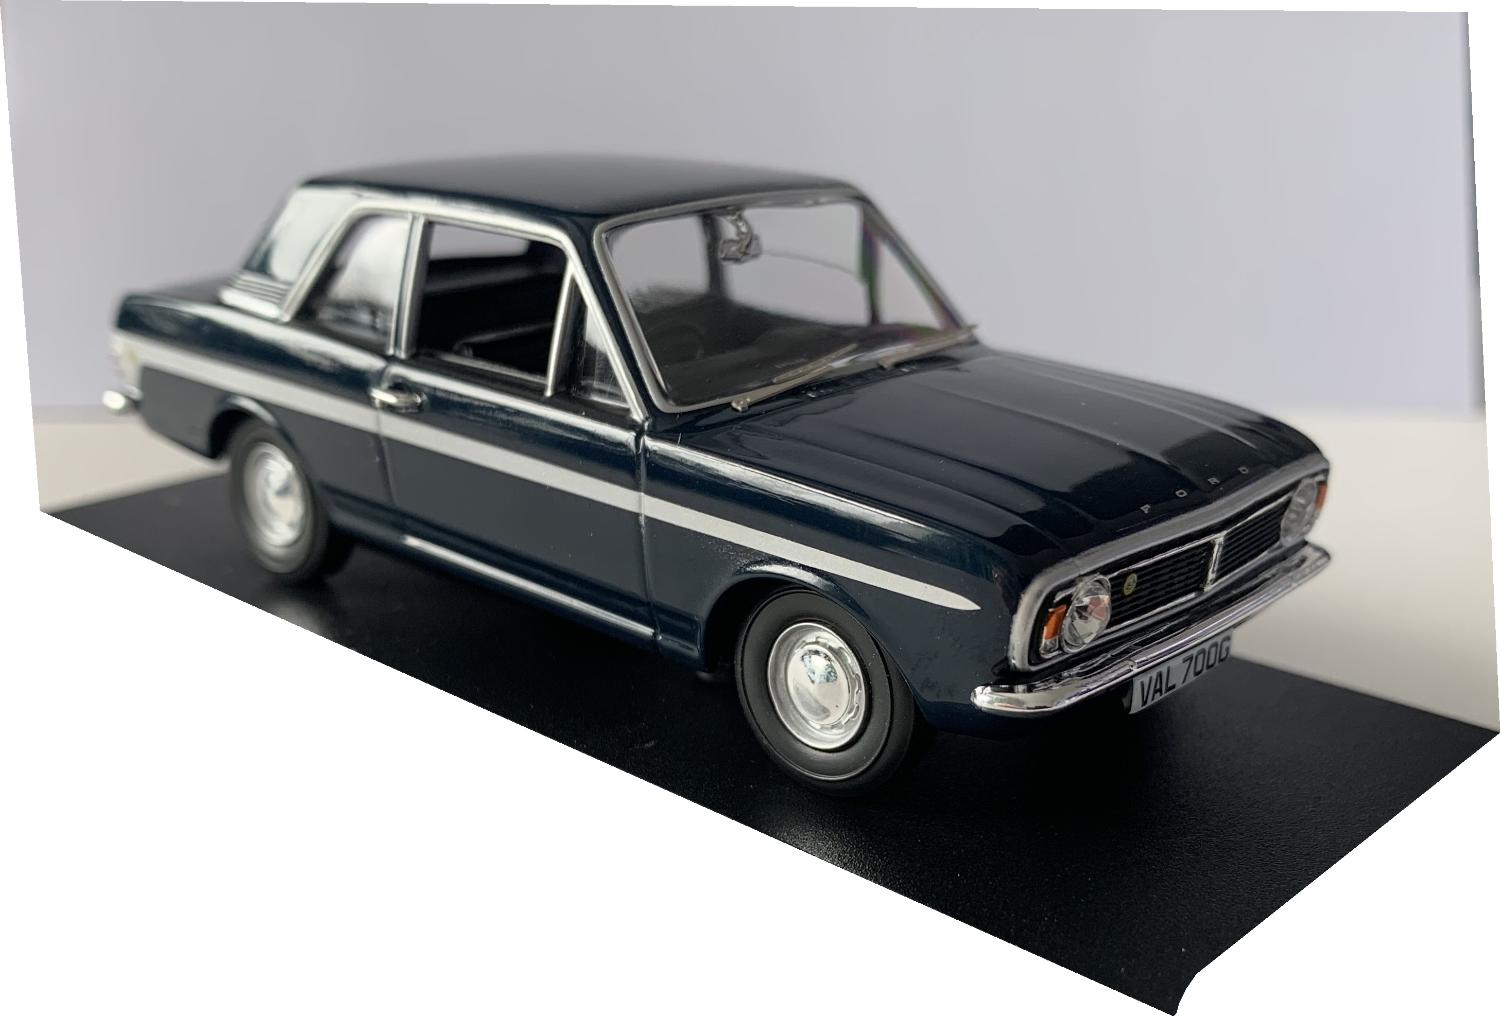 Ford Cortina mk 2 Twin Cam (Lotus) 1968 in anchor blue 1:43 scale model from Corgi Vanguards,VA04120 limited edition